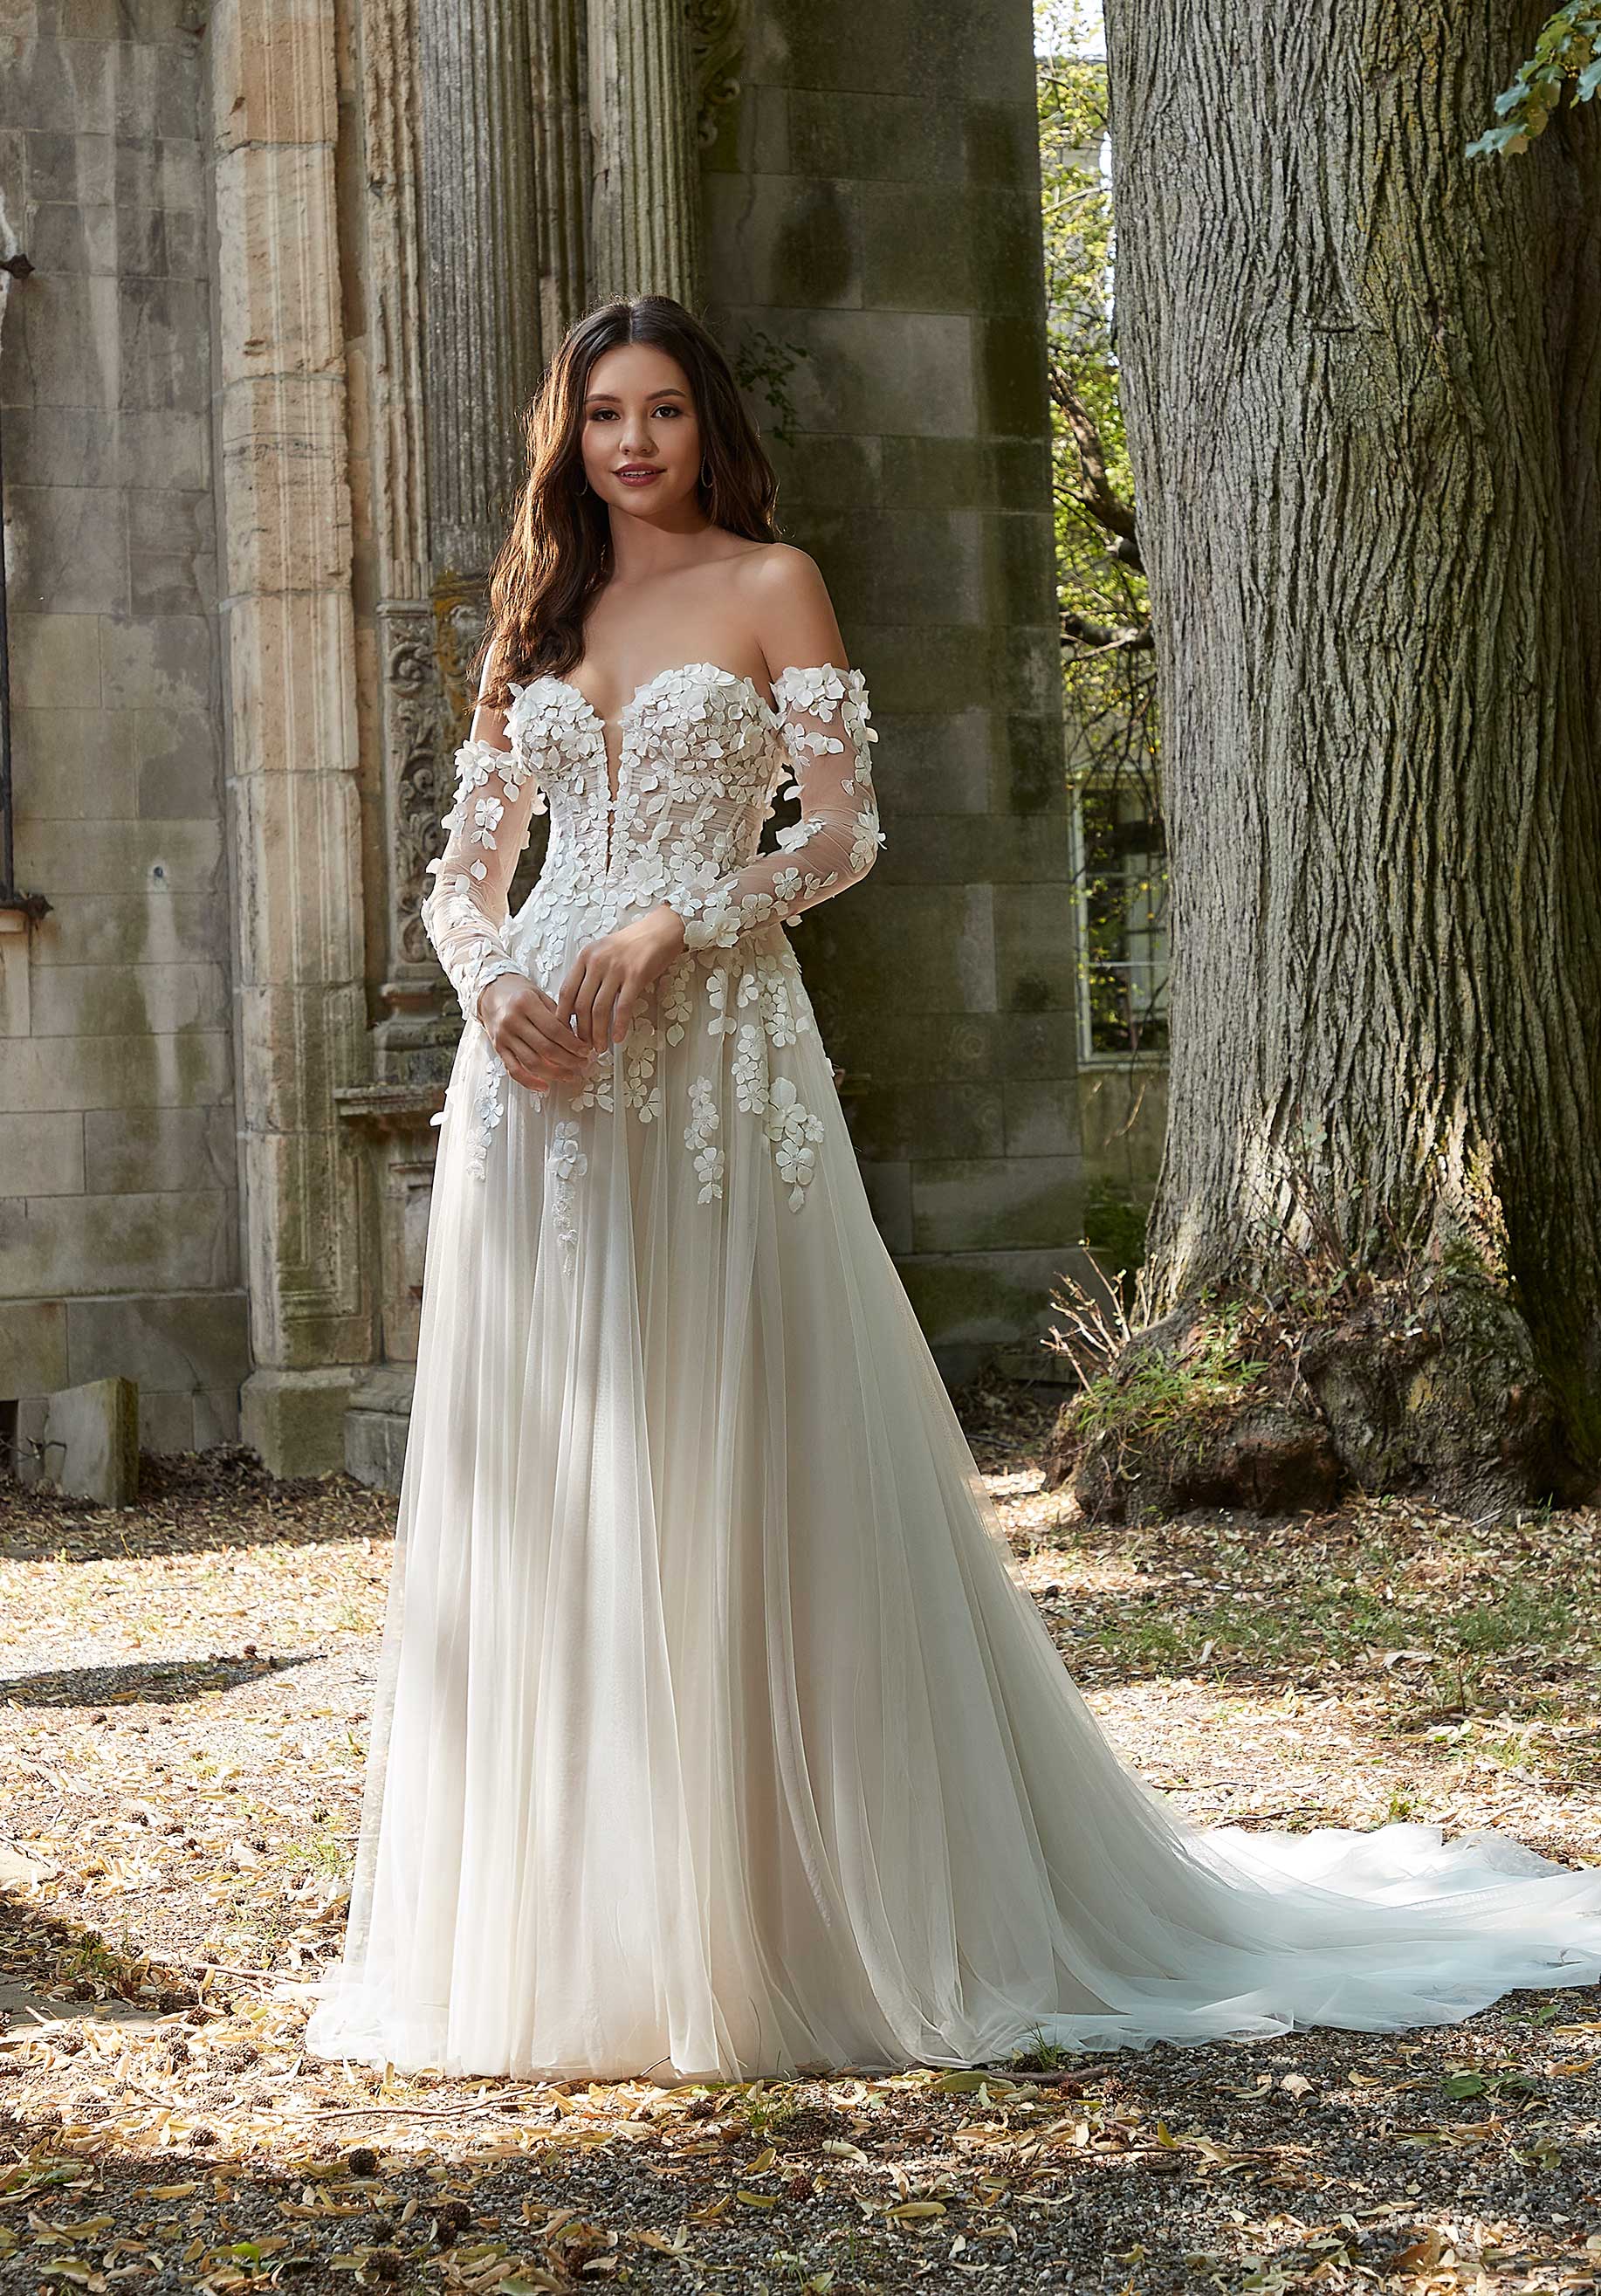 Novias Bridal  Sequin Embroidered Chantilly Lace Evening Gown